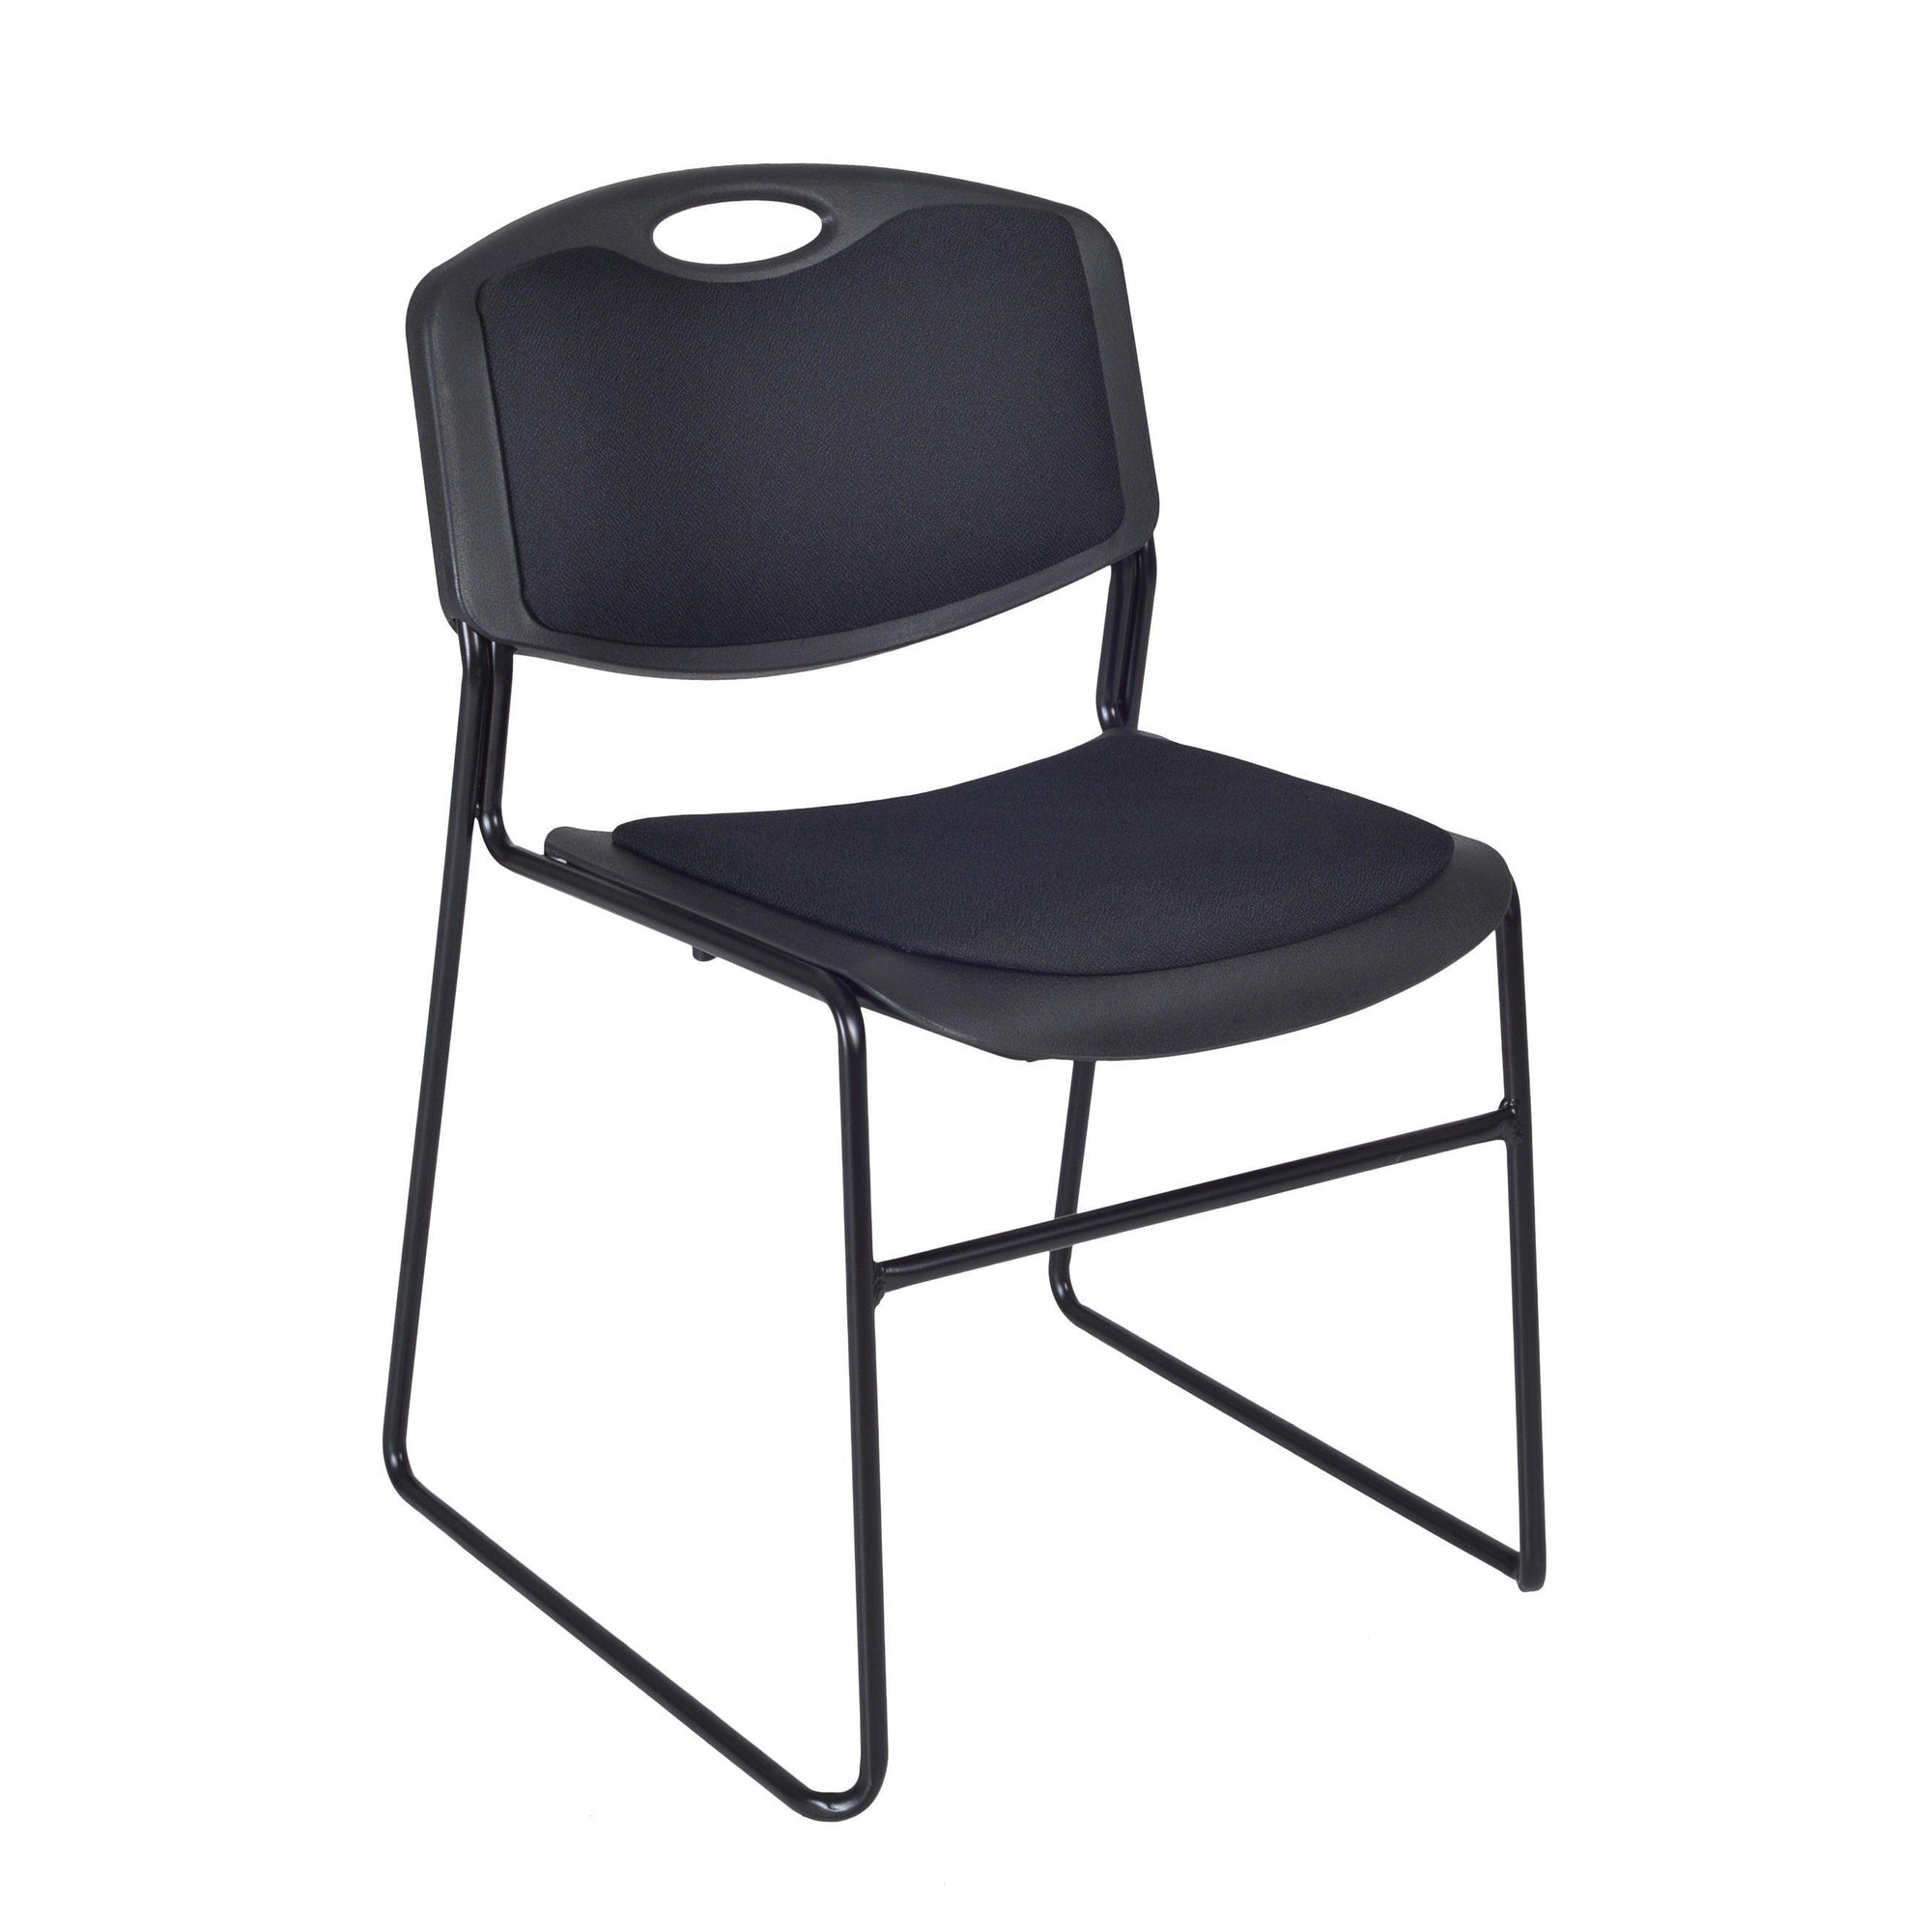 Zeng Padded Stack Chair